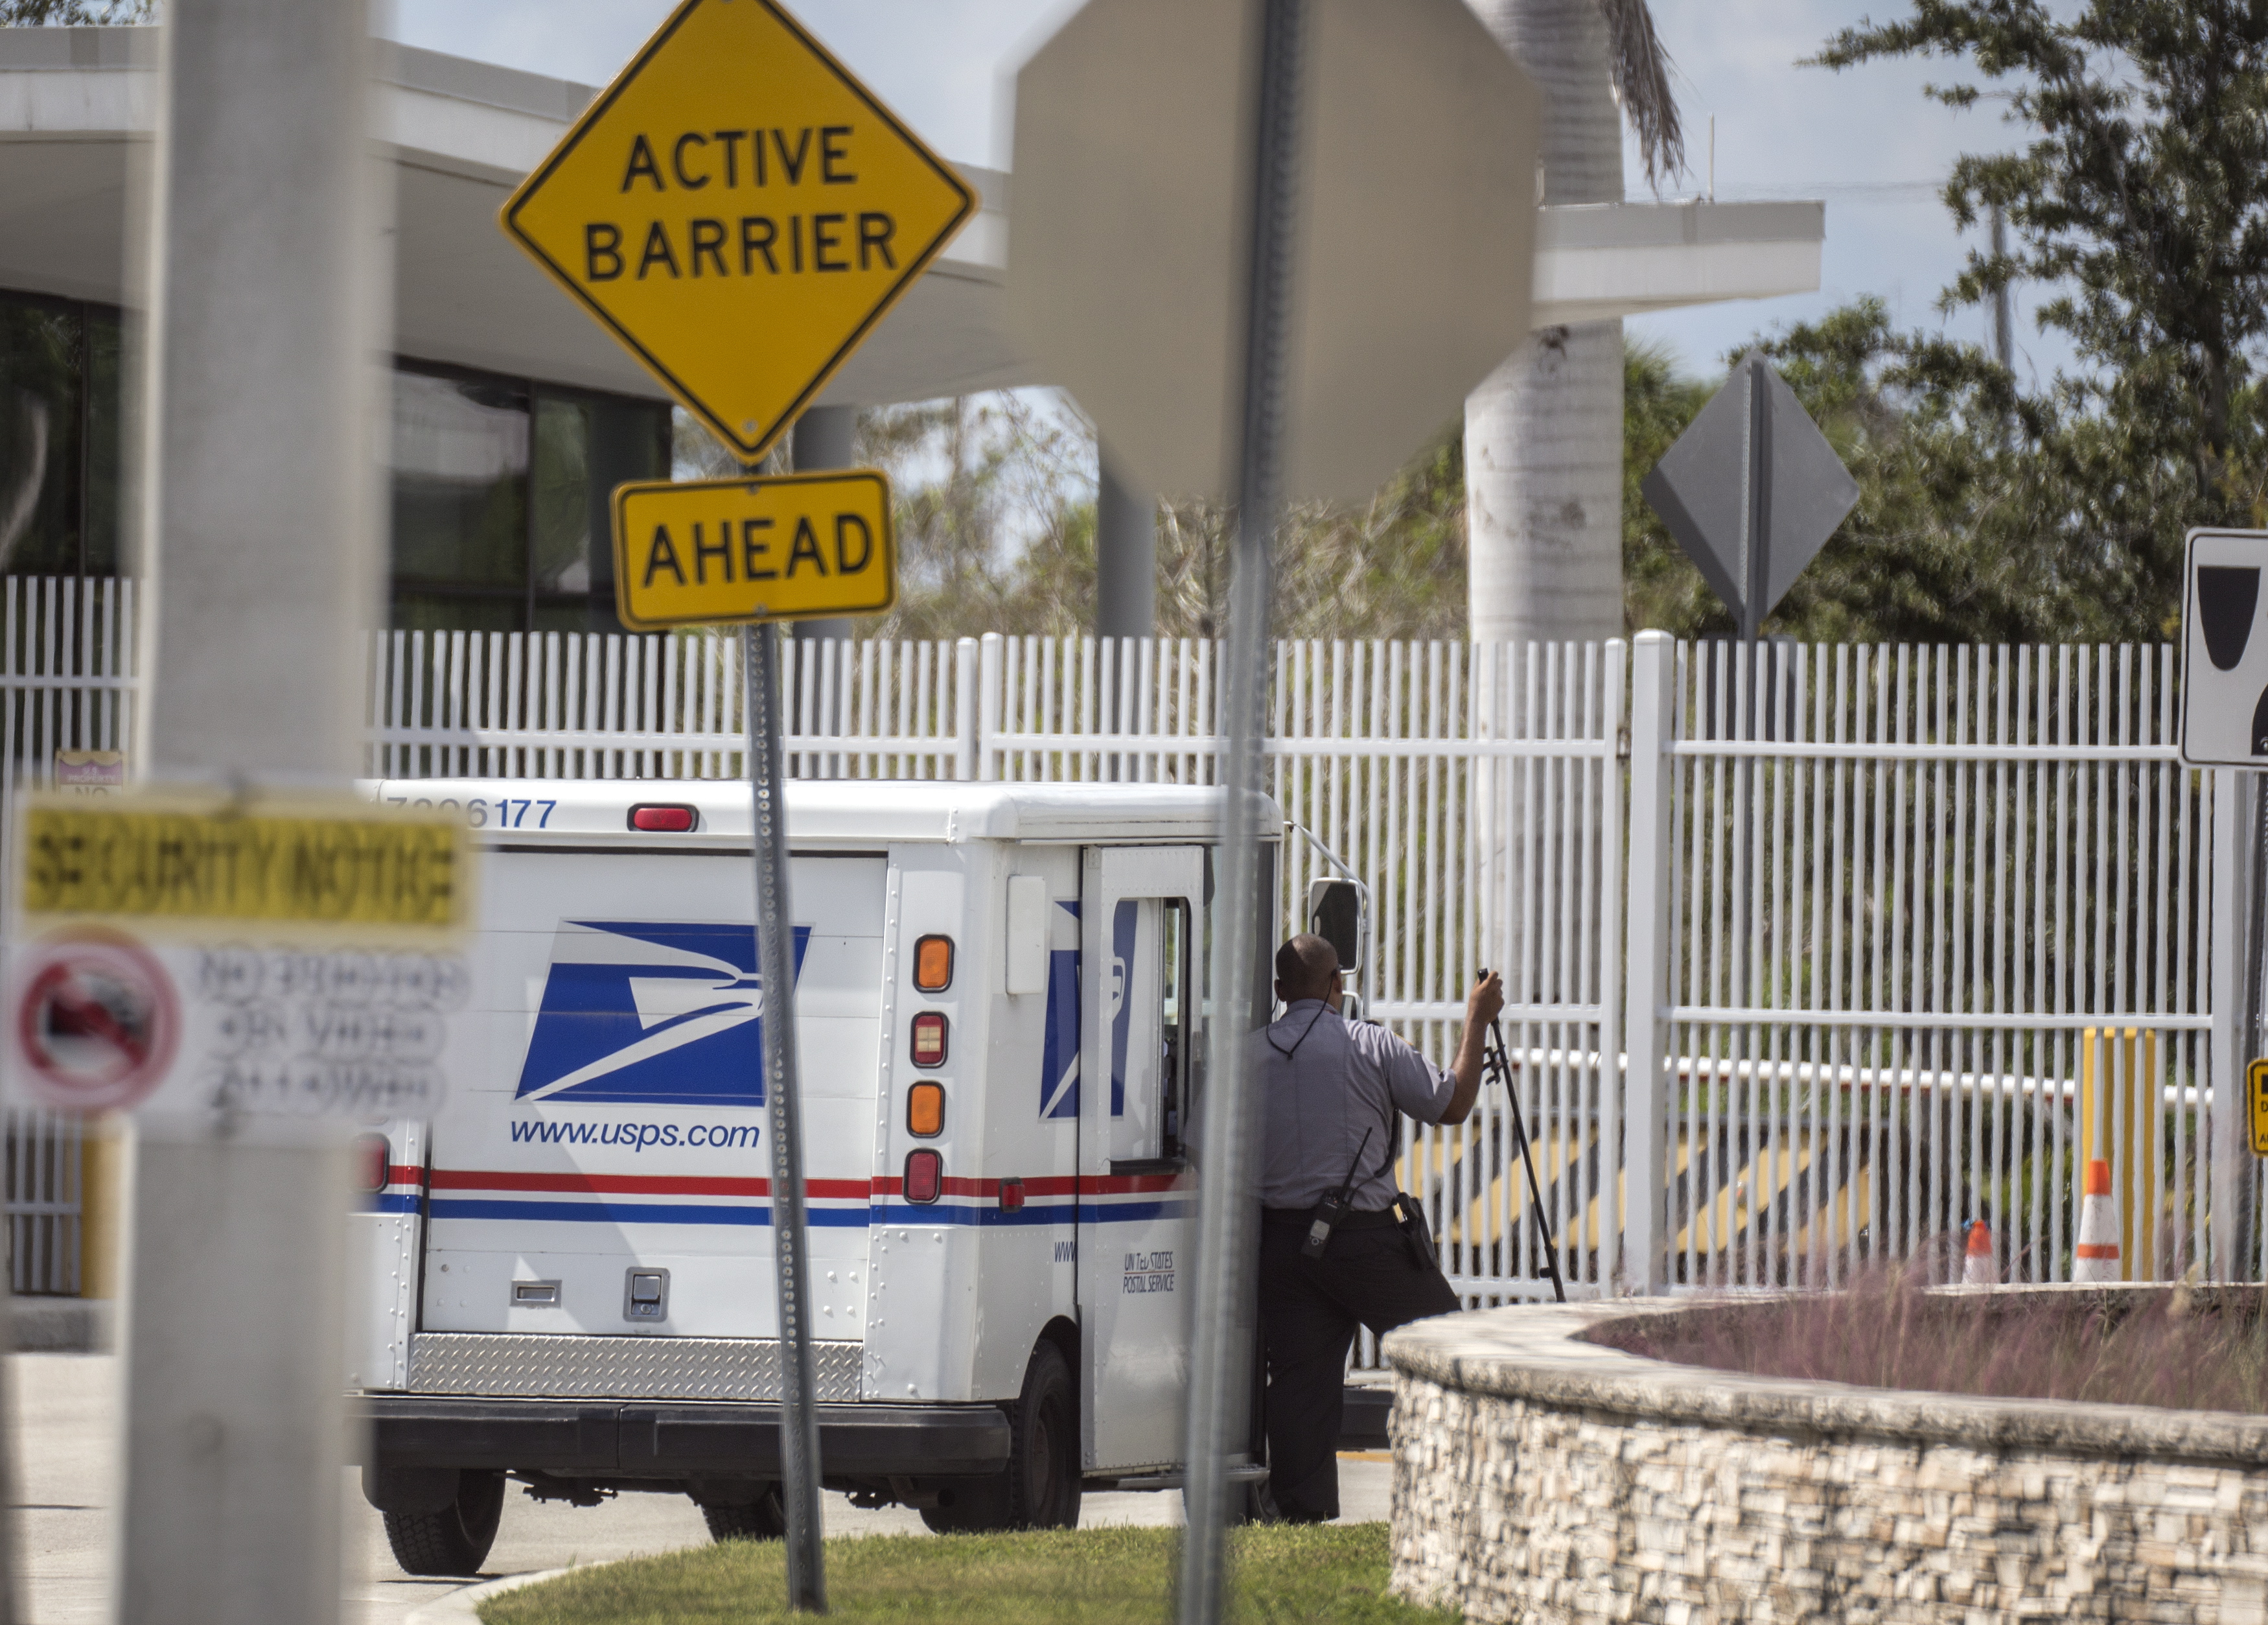 epa07121923 A US Postal Service truck is seen at the FBI Miami-Division facility where the van of the suspect in connection to the packages containing pipe bombs was taken in Miramar, Florida, USA, 26 October 2018. Cesar Sayoc was arrested in Plantation, Florida, USA, on 26 October 2018 for his alleged role in connection to the packages containing pipe bombs which were sent in recent days to several prominent figures across the country, sparking a sprawling nationwide investigation.  FBI Assistant Director William Sweeney warned the 'American public to remain vigilant as it does remain possible further packages have been or could be mailed.  EPA/CRISTOBAL HERRERA